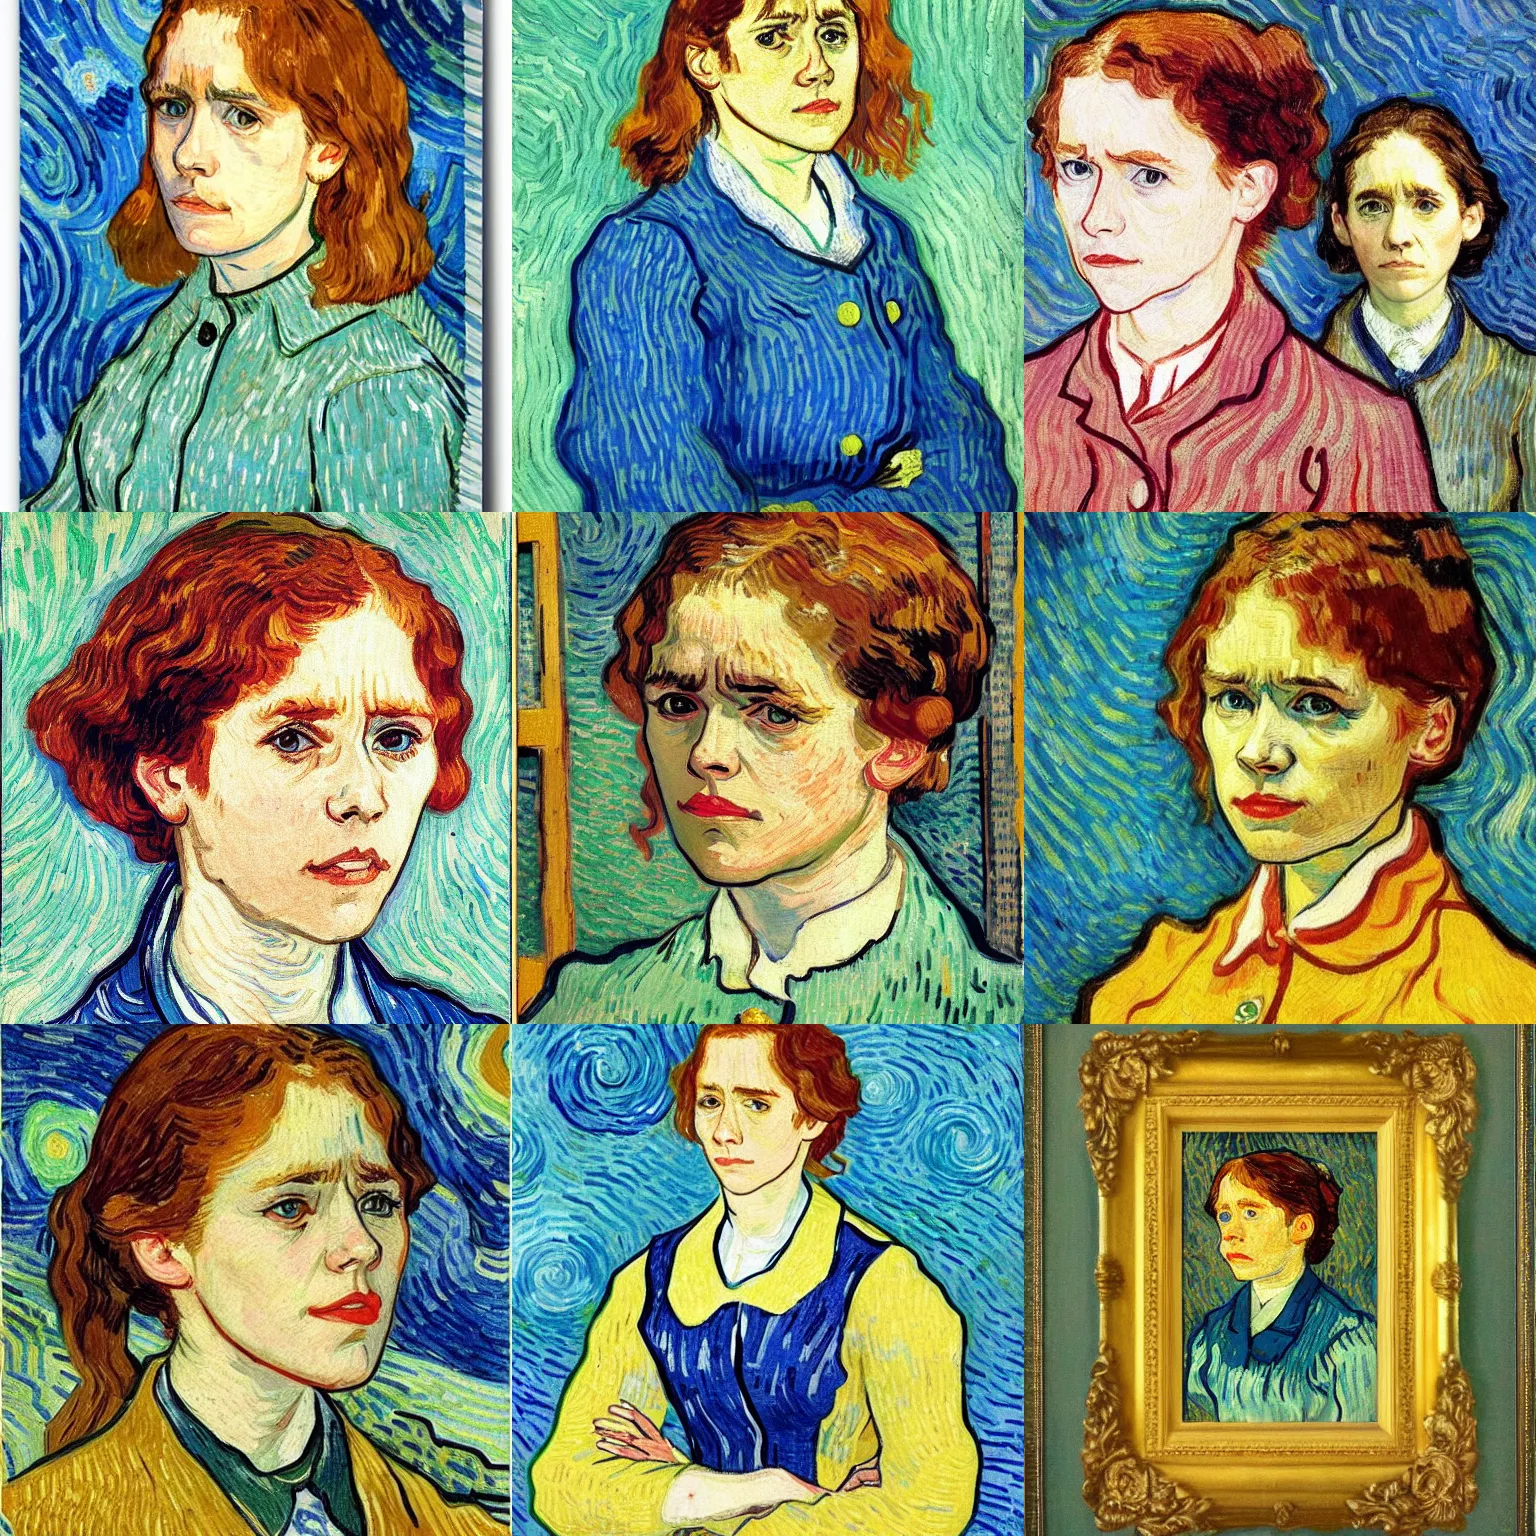 Prompt: portrait of a female asa Butterfield mixed with pam beesly by van gogh